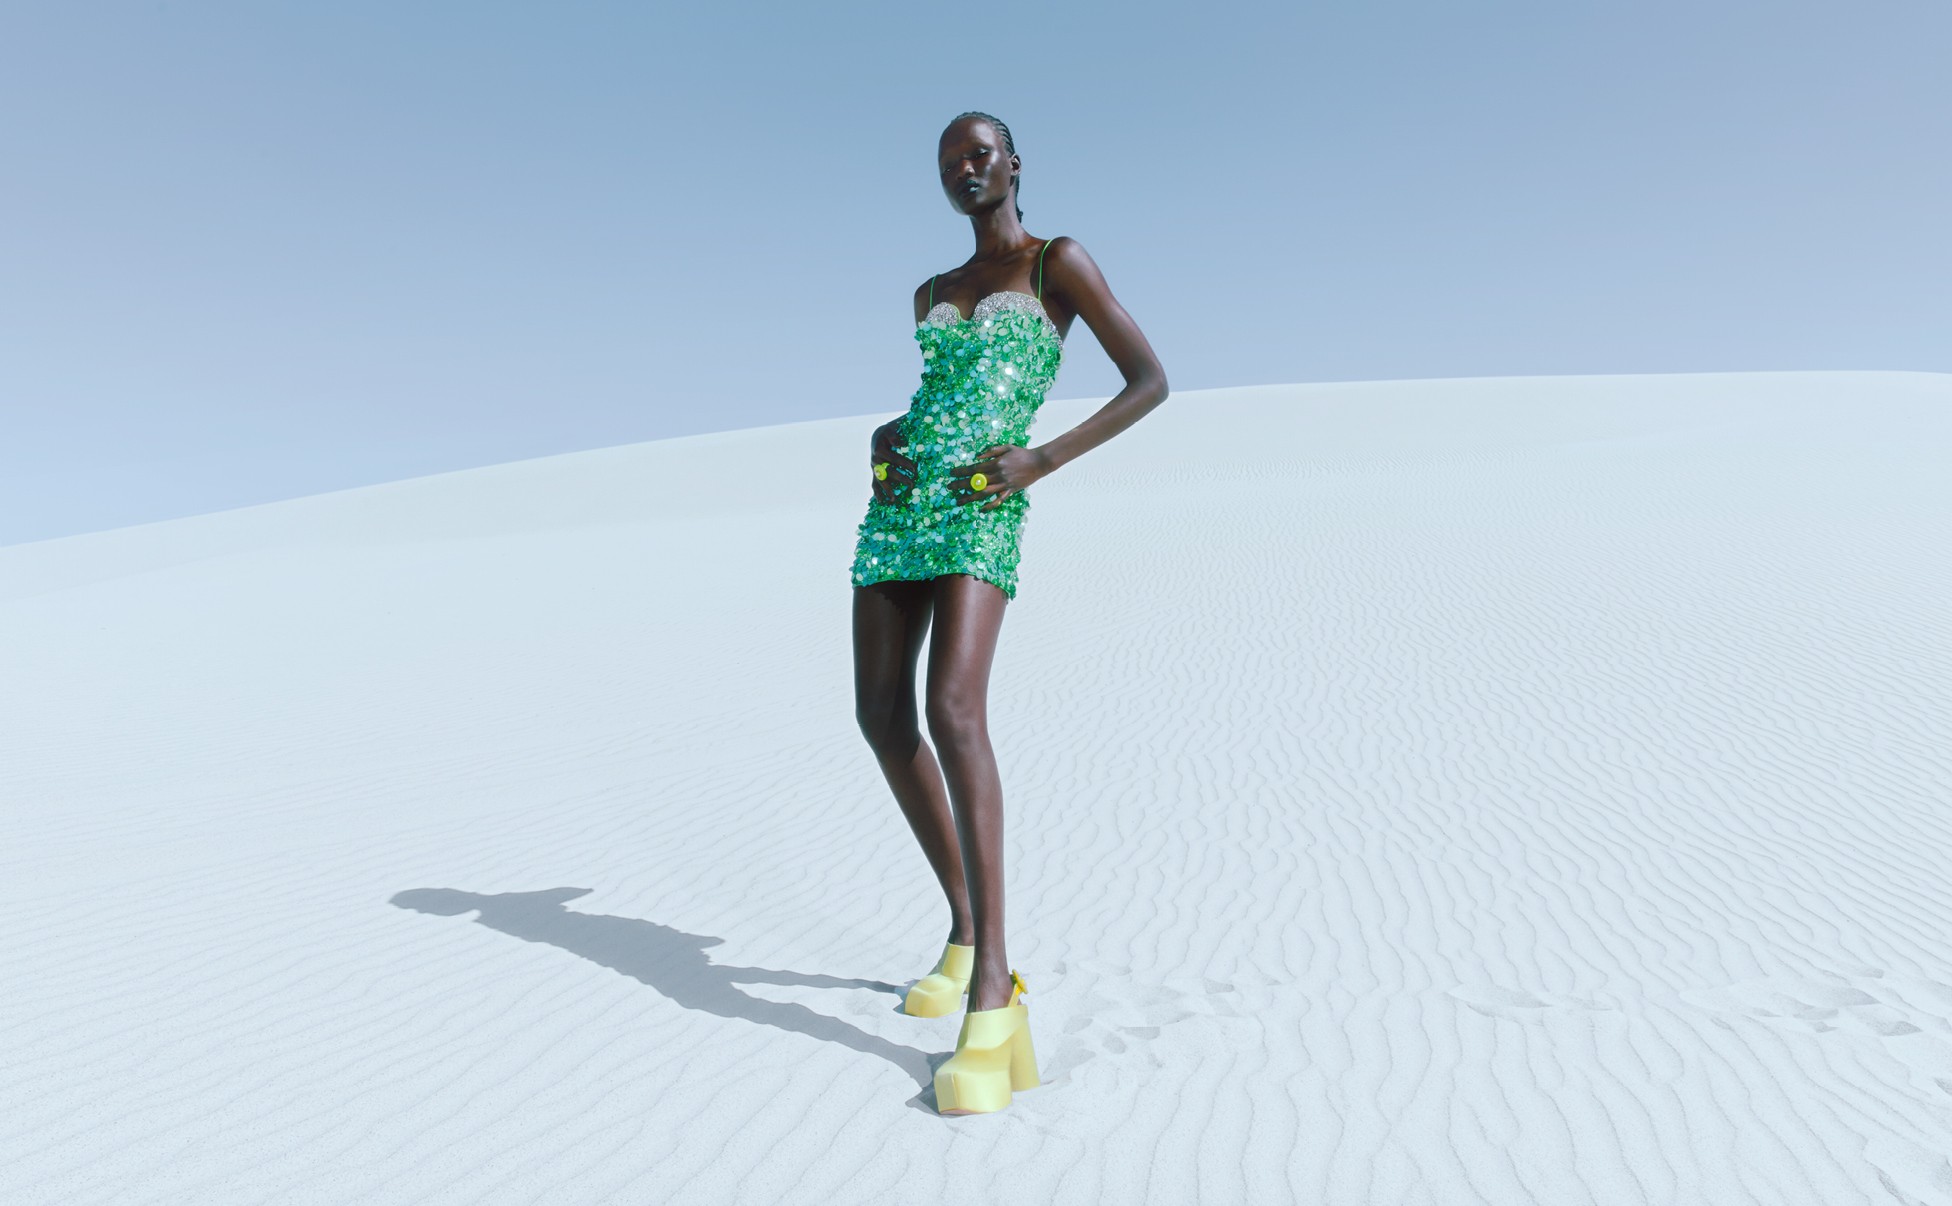 H&M's New Girls' Fashion Collection Made With Recycled Plastic